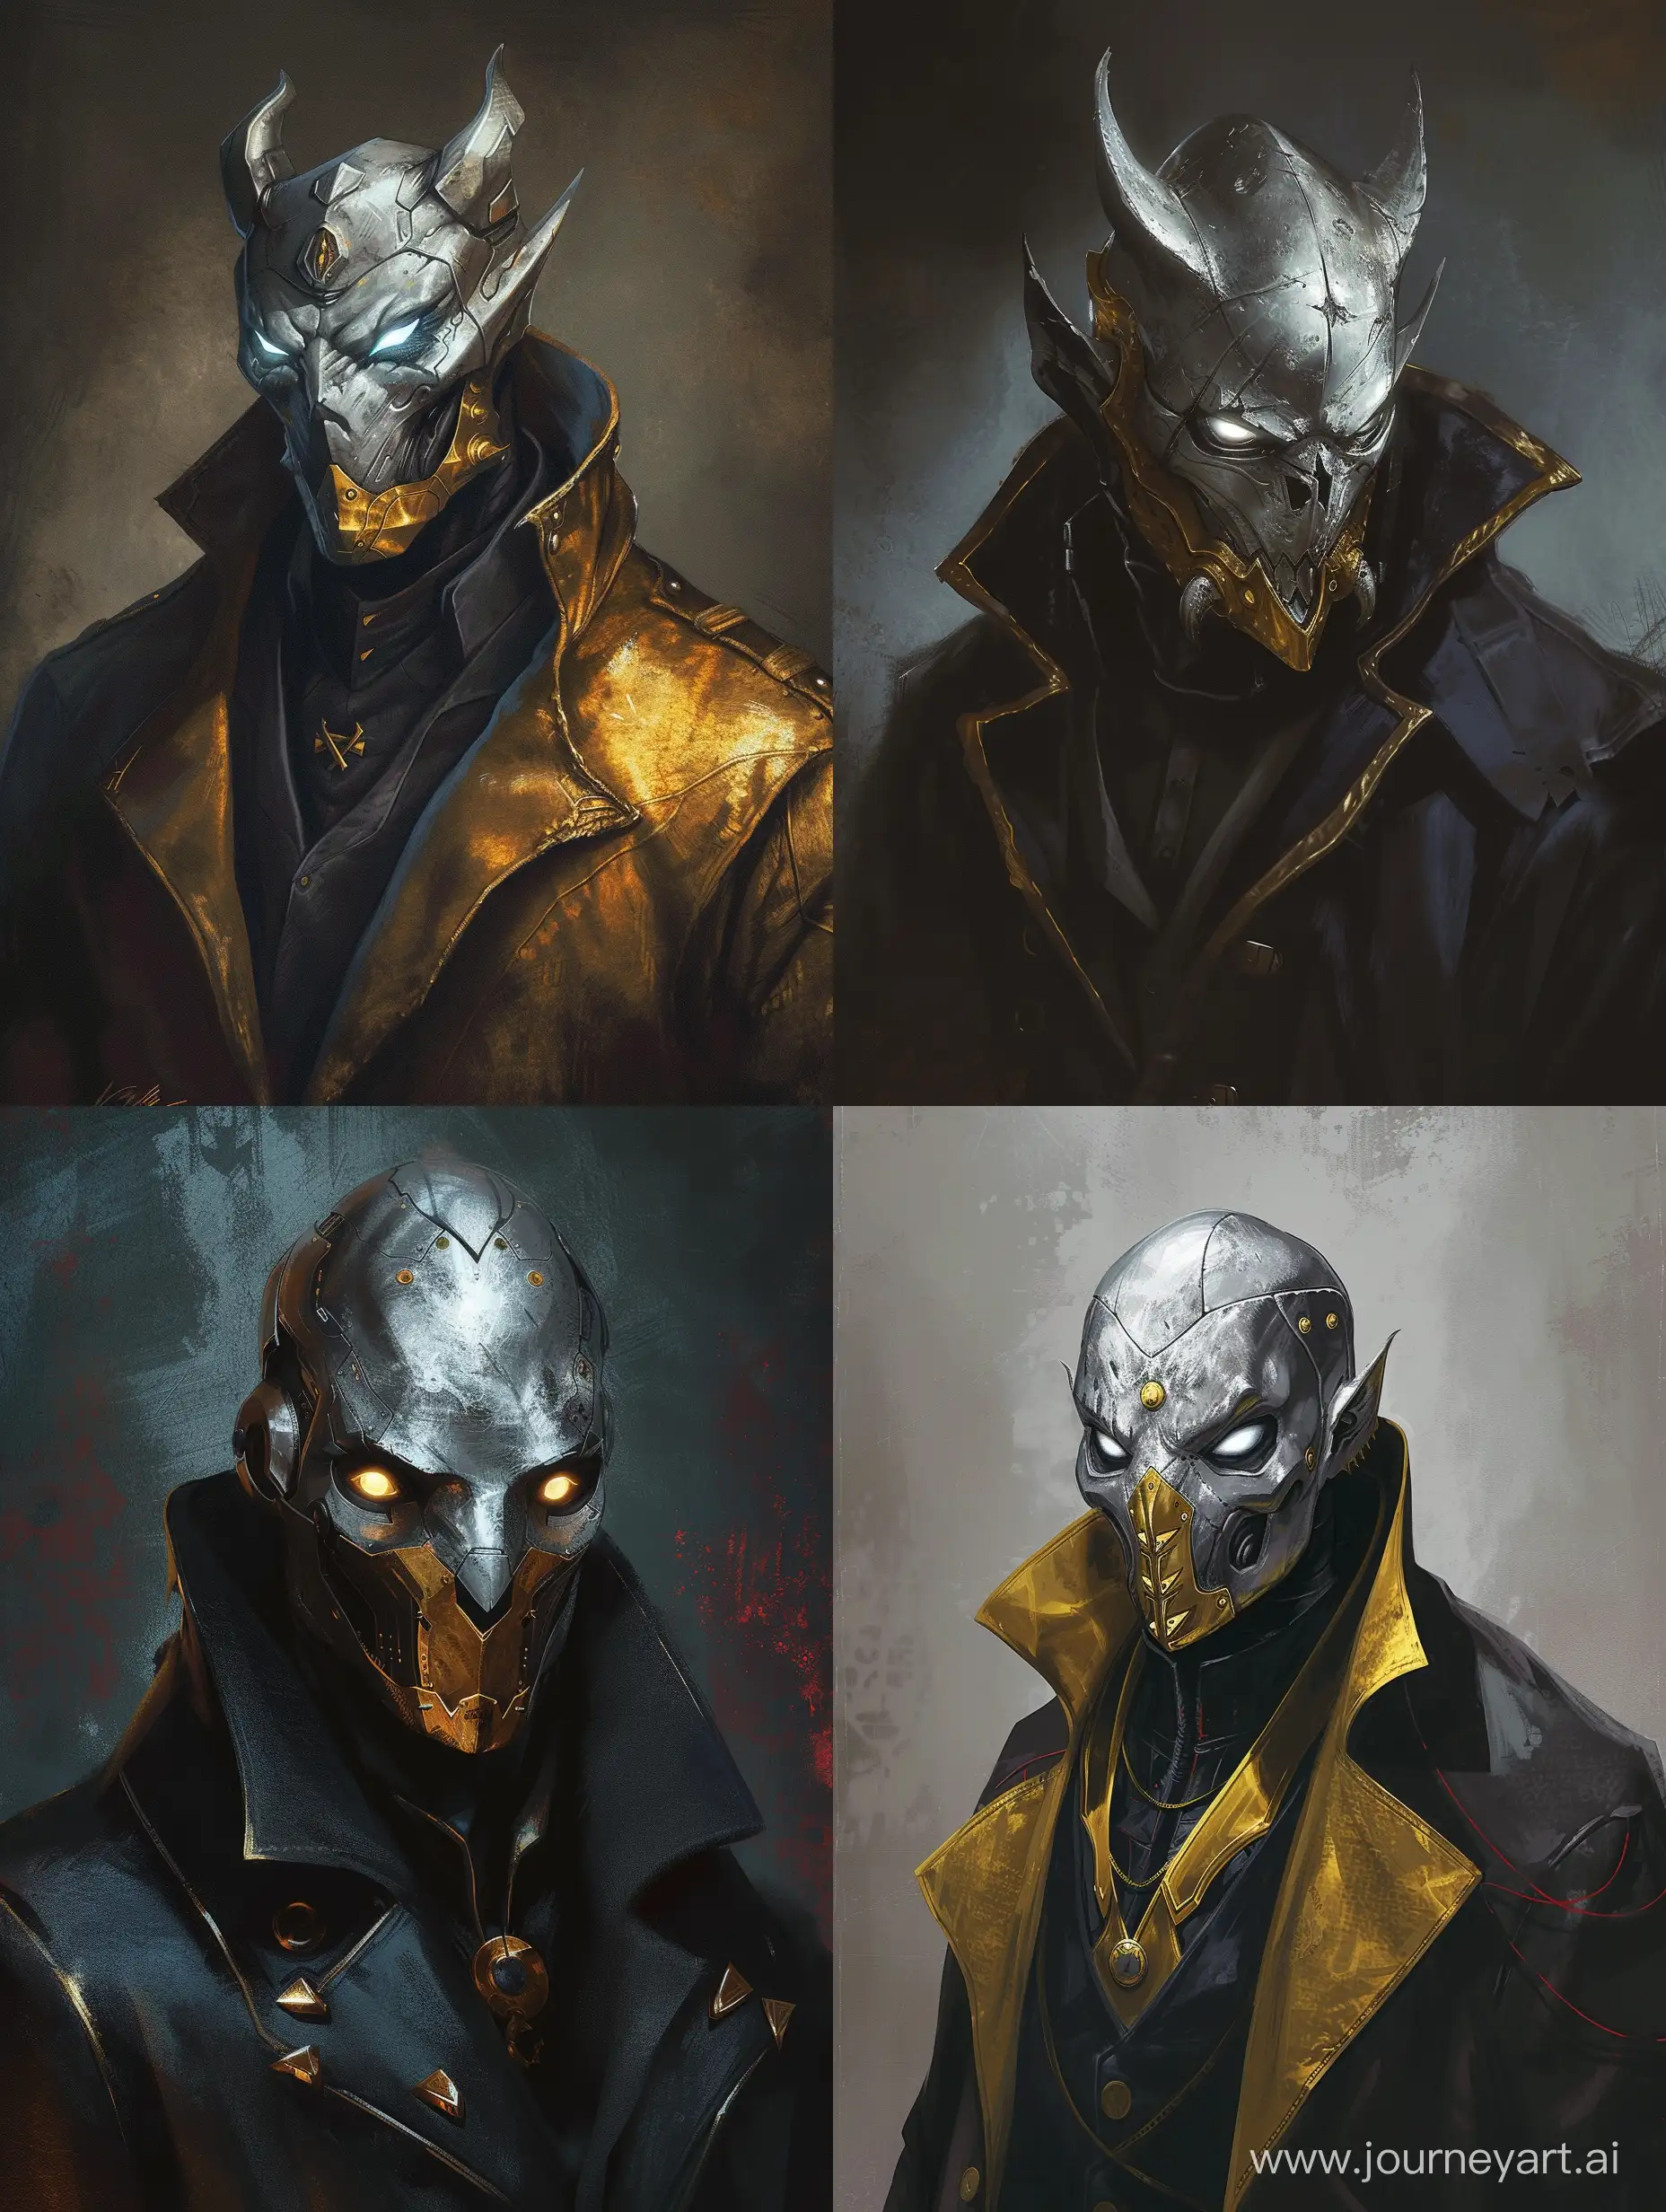 concept art reference, comics style demon lord, silver eyesles mask, glow eyes, humanization, in science coat, gold mask, portrait sheet